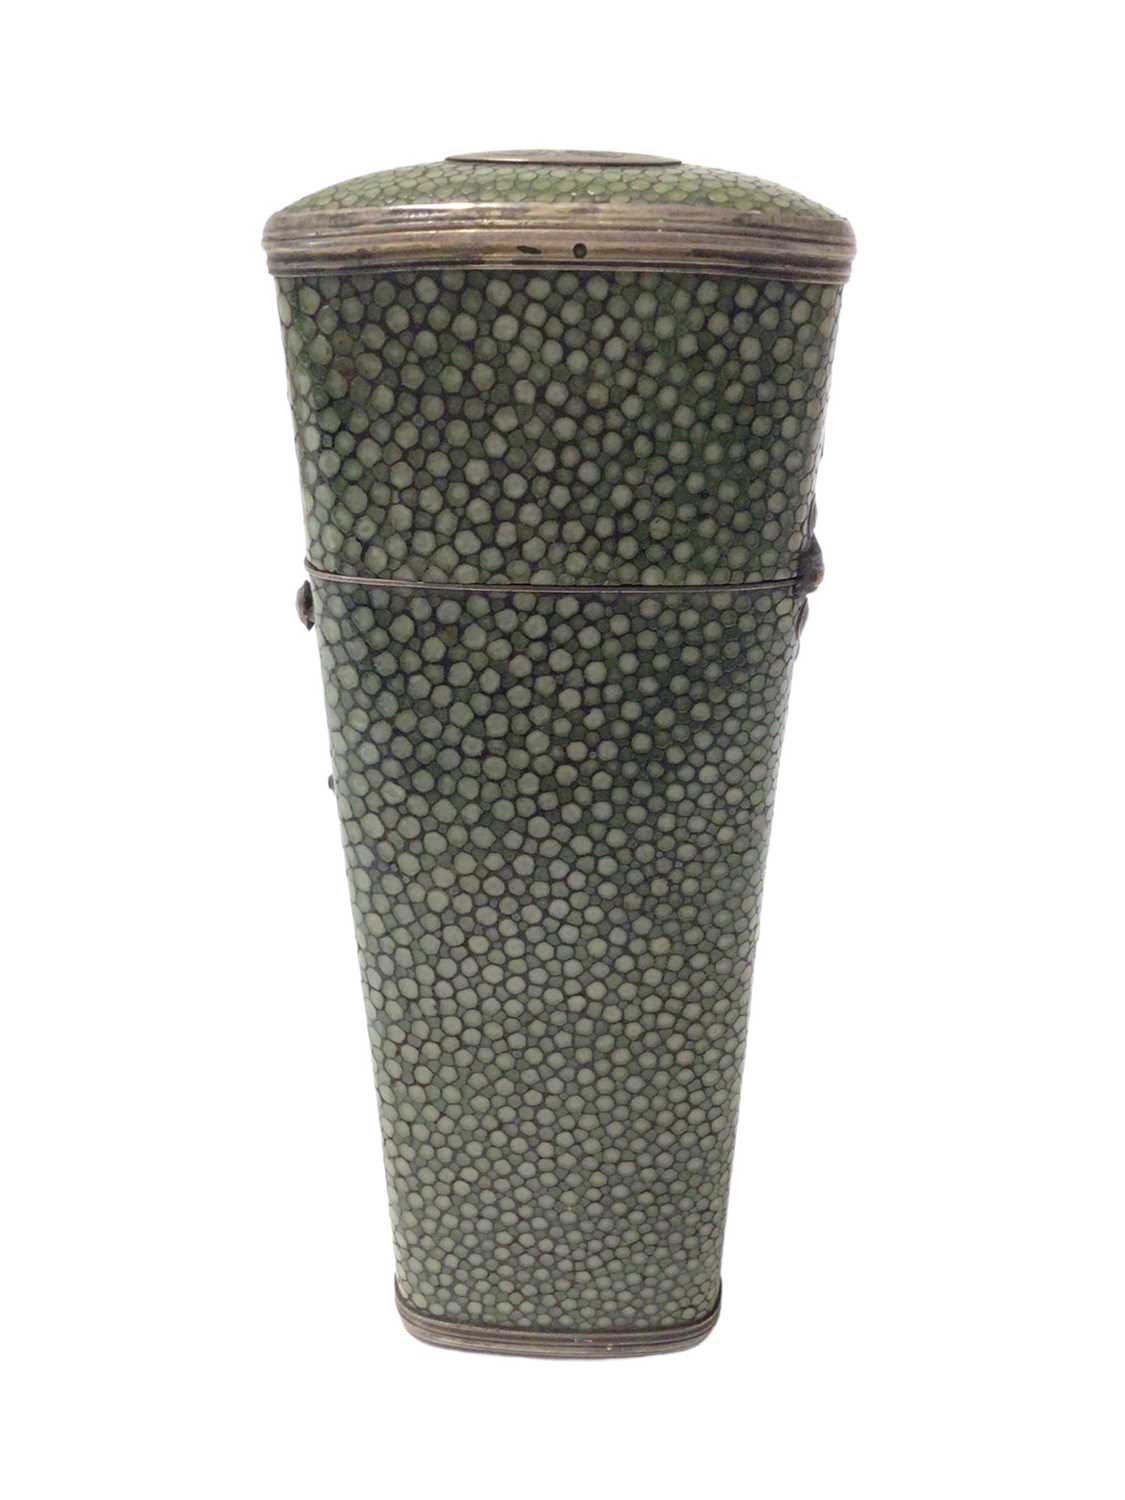 George III shagreen and silver mounted drawing instrument case - Image 3 of 4